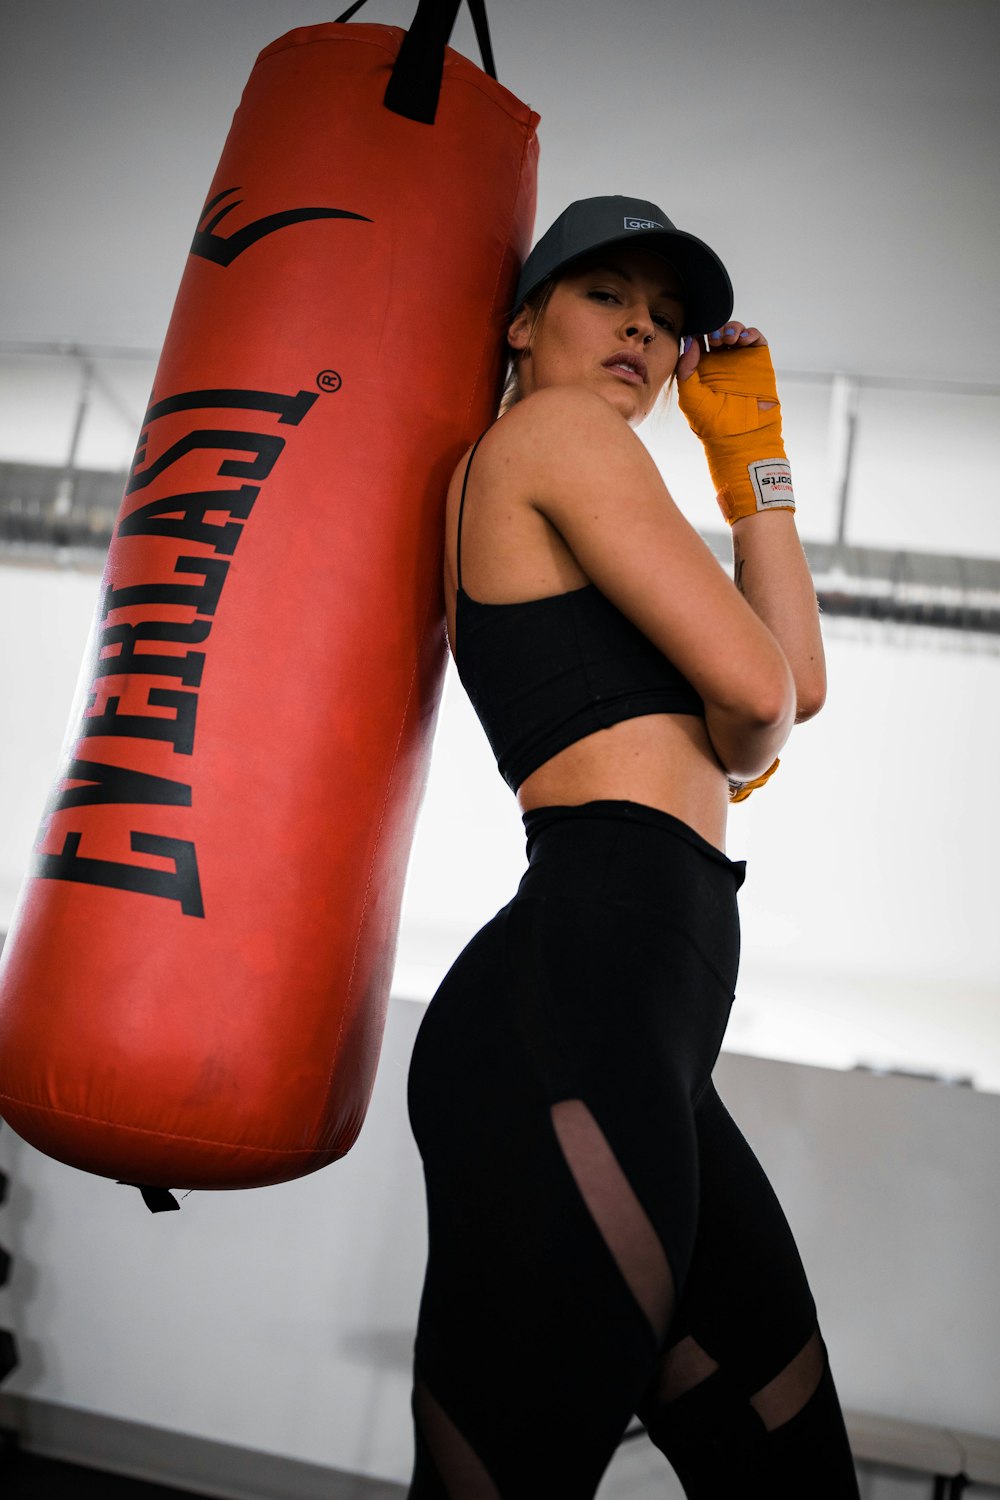 woman in black sports bra and black shorts leaning on orange and black boxing ring